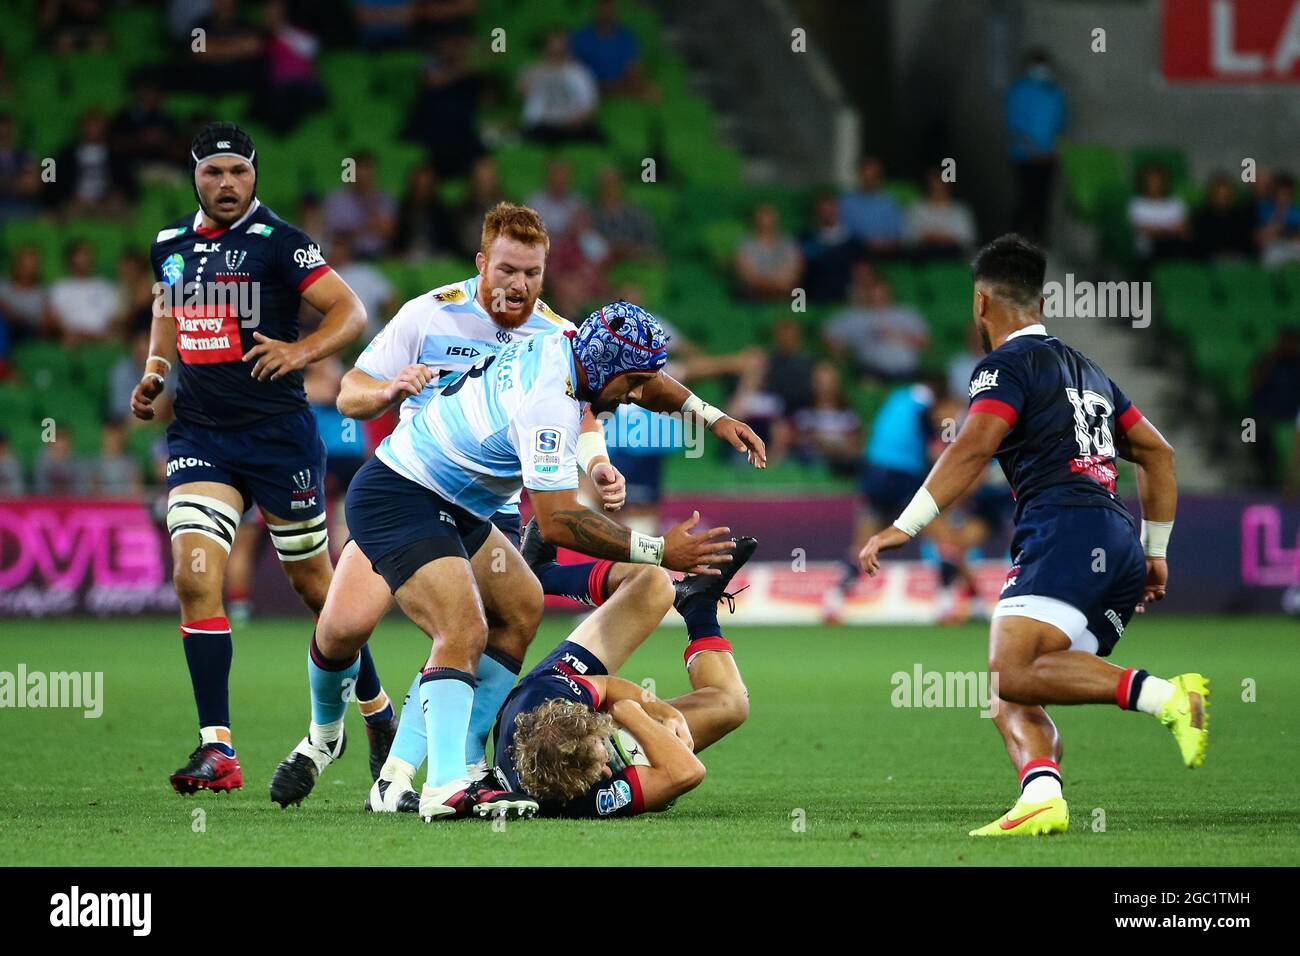 MELBOURNE, AUSTRALIA - MARCH 19: Joe Powell of the Melbourne Rebels gets tackled during the round 5 Super Rugby match between the Melbourne Rebels and NSW Waratahs at AAMI Park on March 19, 2021 in Melbourne, Australia.  Credit: Dave Hewison/Speed Media/Alamy Live News Stock Photo